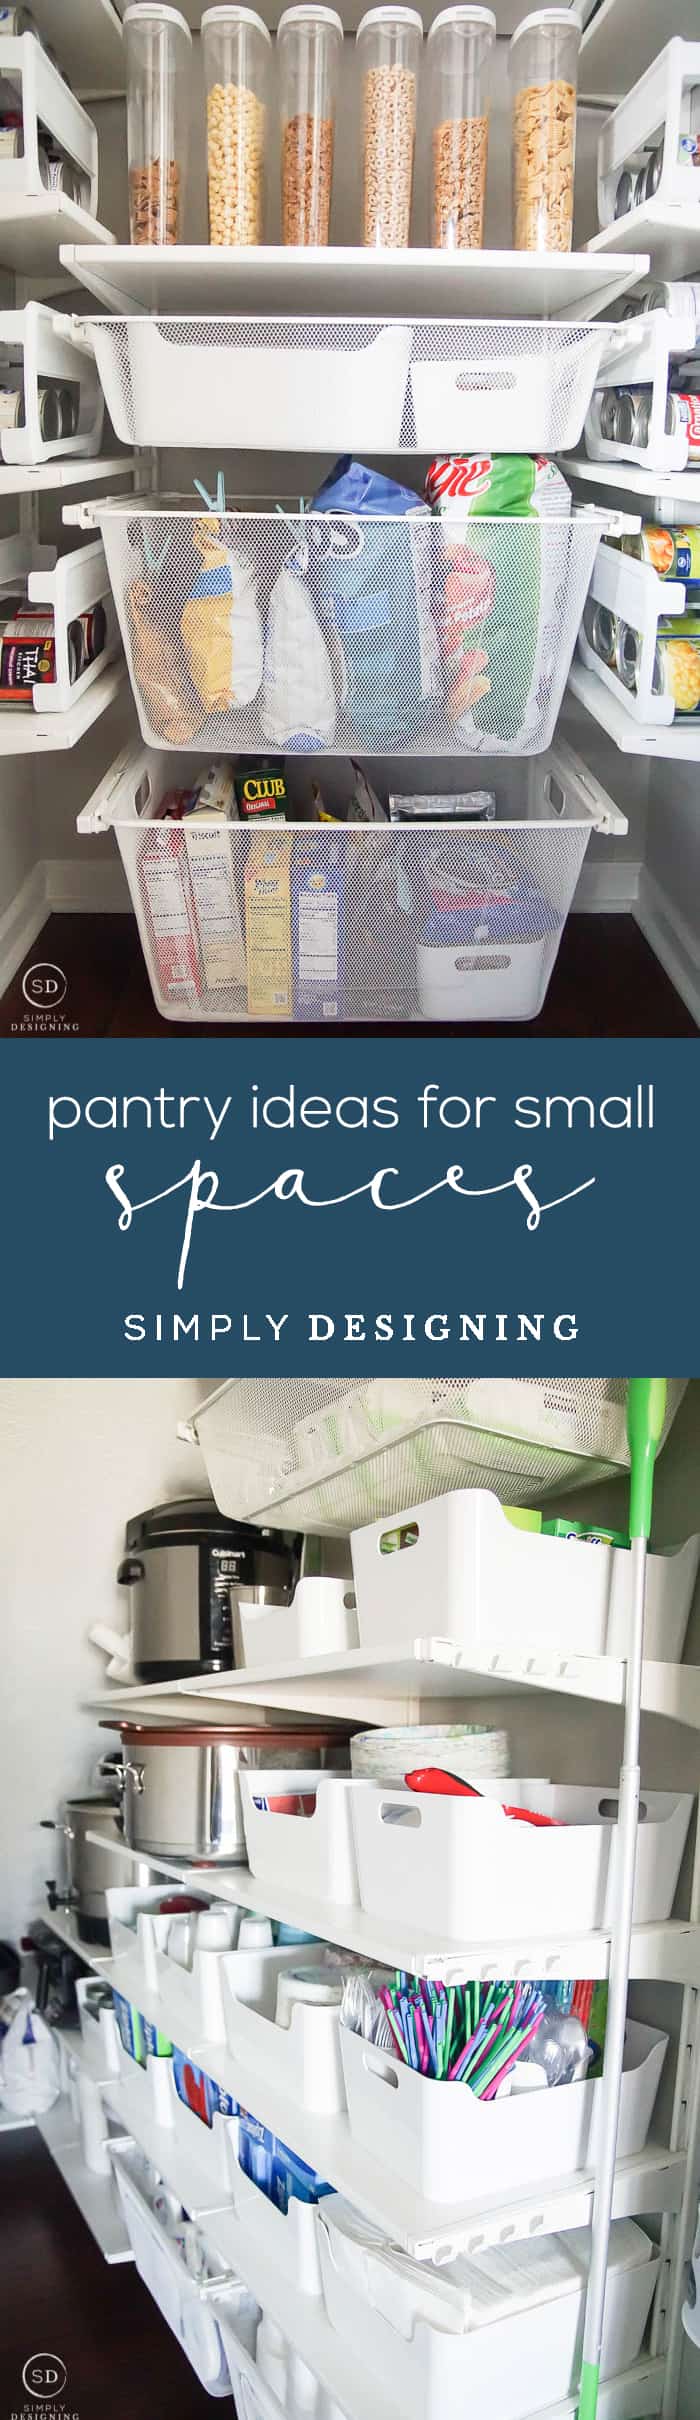 How to Organize a Closet Under the Stairs and DIY Pantry Organization Ideas - pantry ideas for small spaces